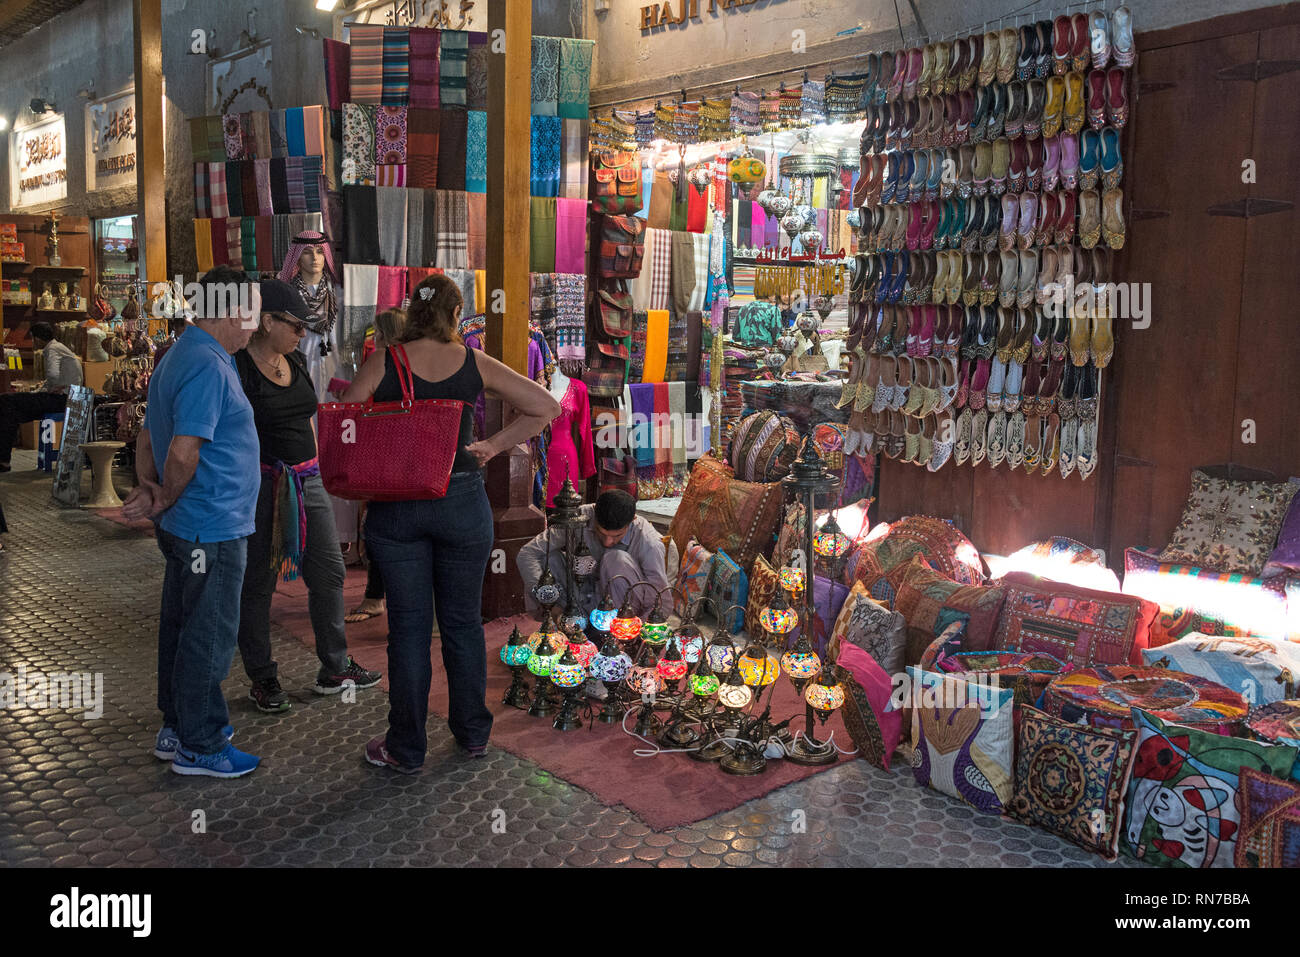 An almost deserted Old Spice Souk in Deira, Dubai in the United Arab Emirates, (UAE) on a Friday morning as Muslim traders and shoppers were at prayer Stock Photo